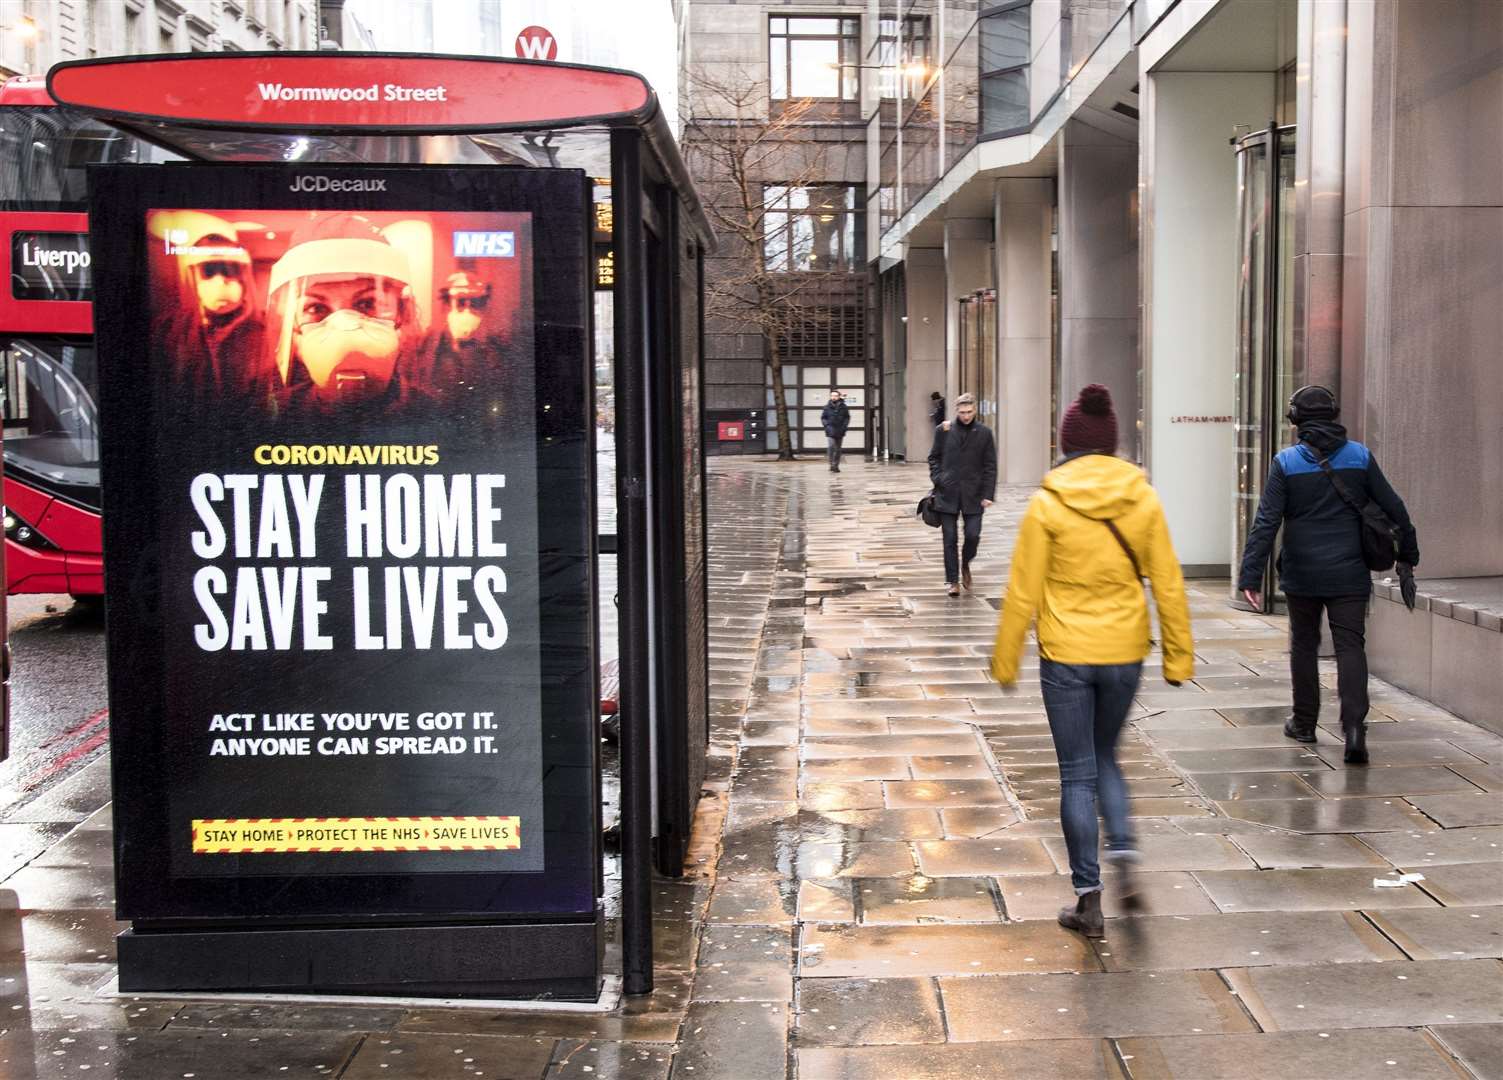 Stay Home Save Lives warning. Picture: PA Media